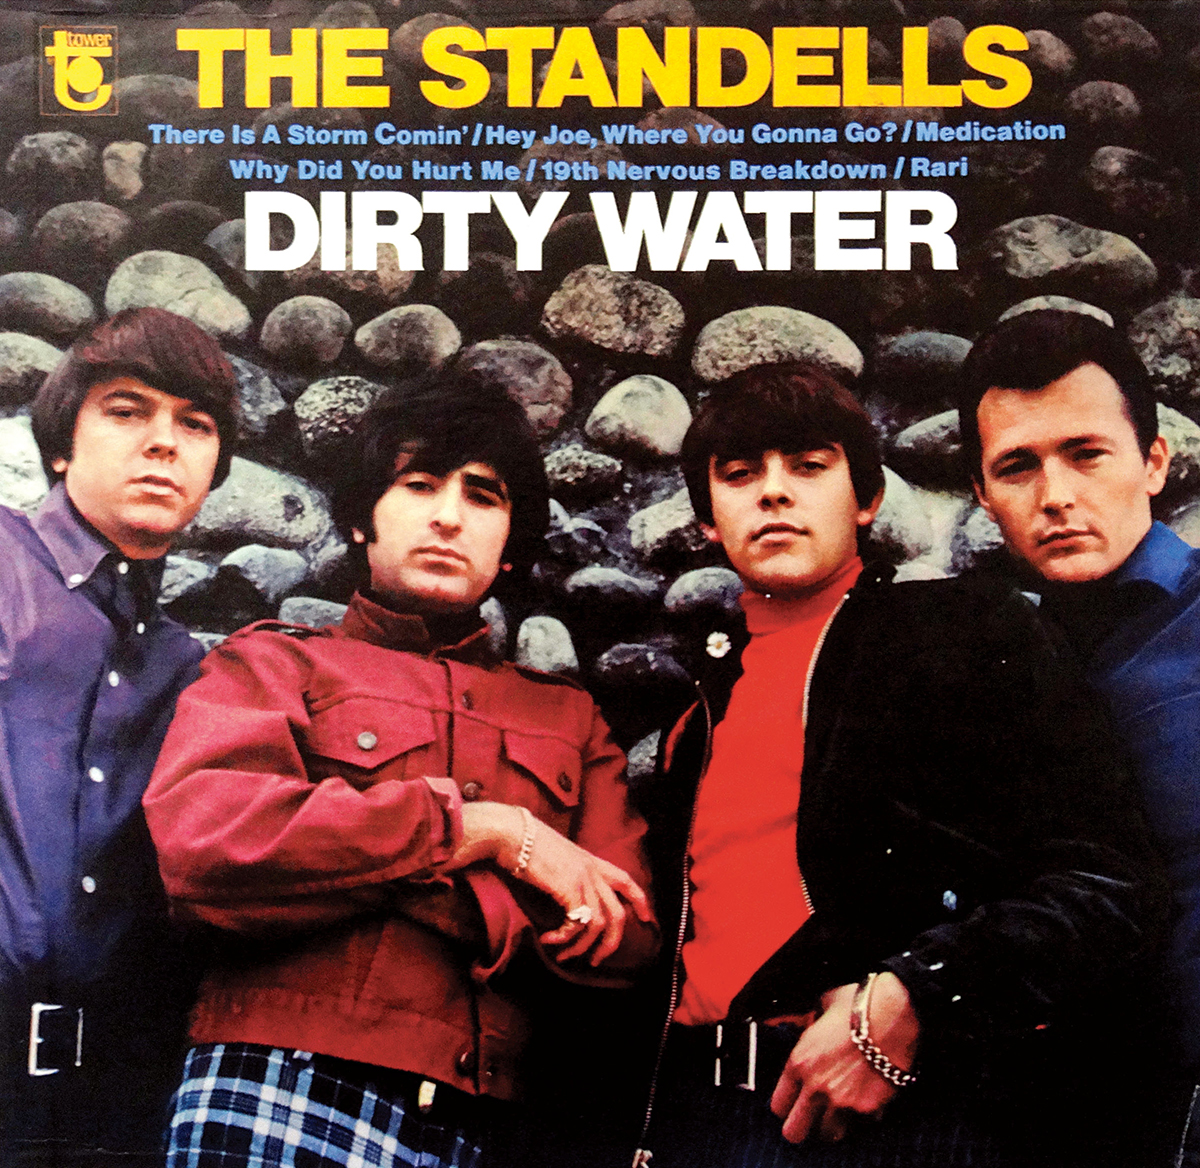 the standells dirty water album cover